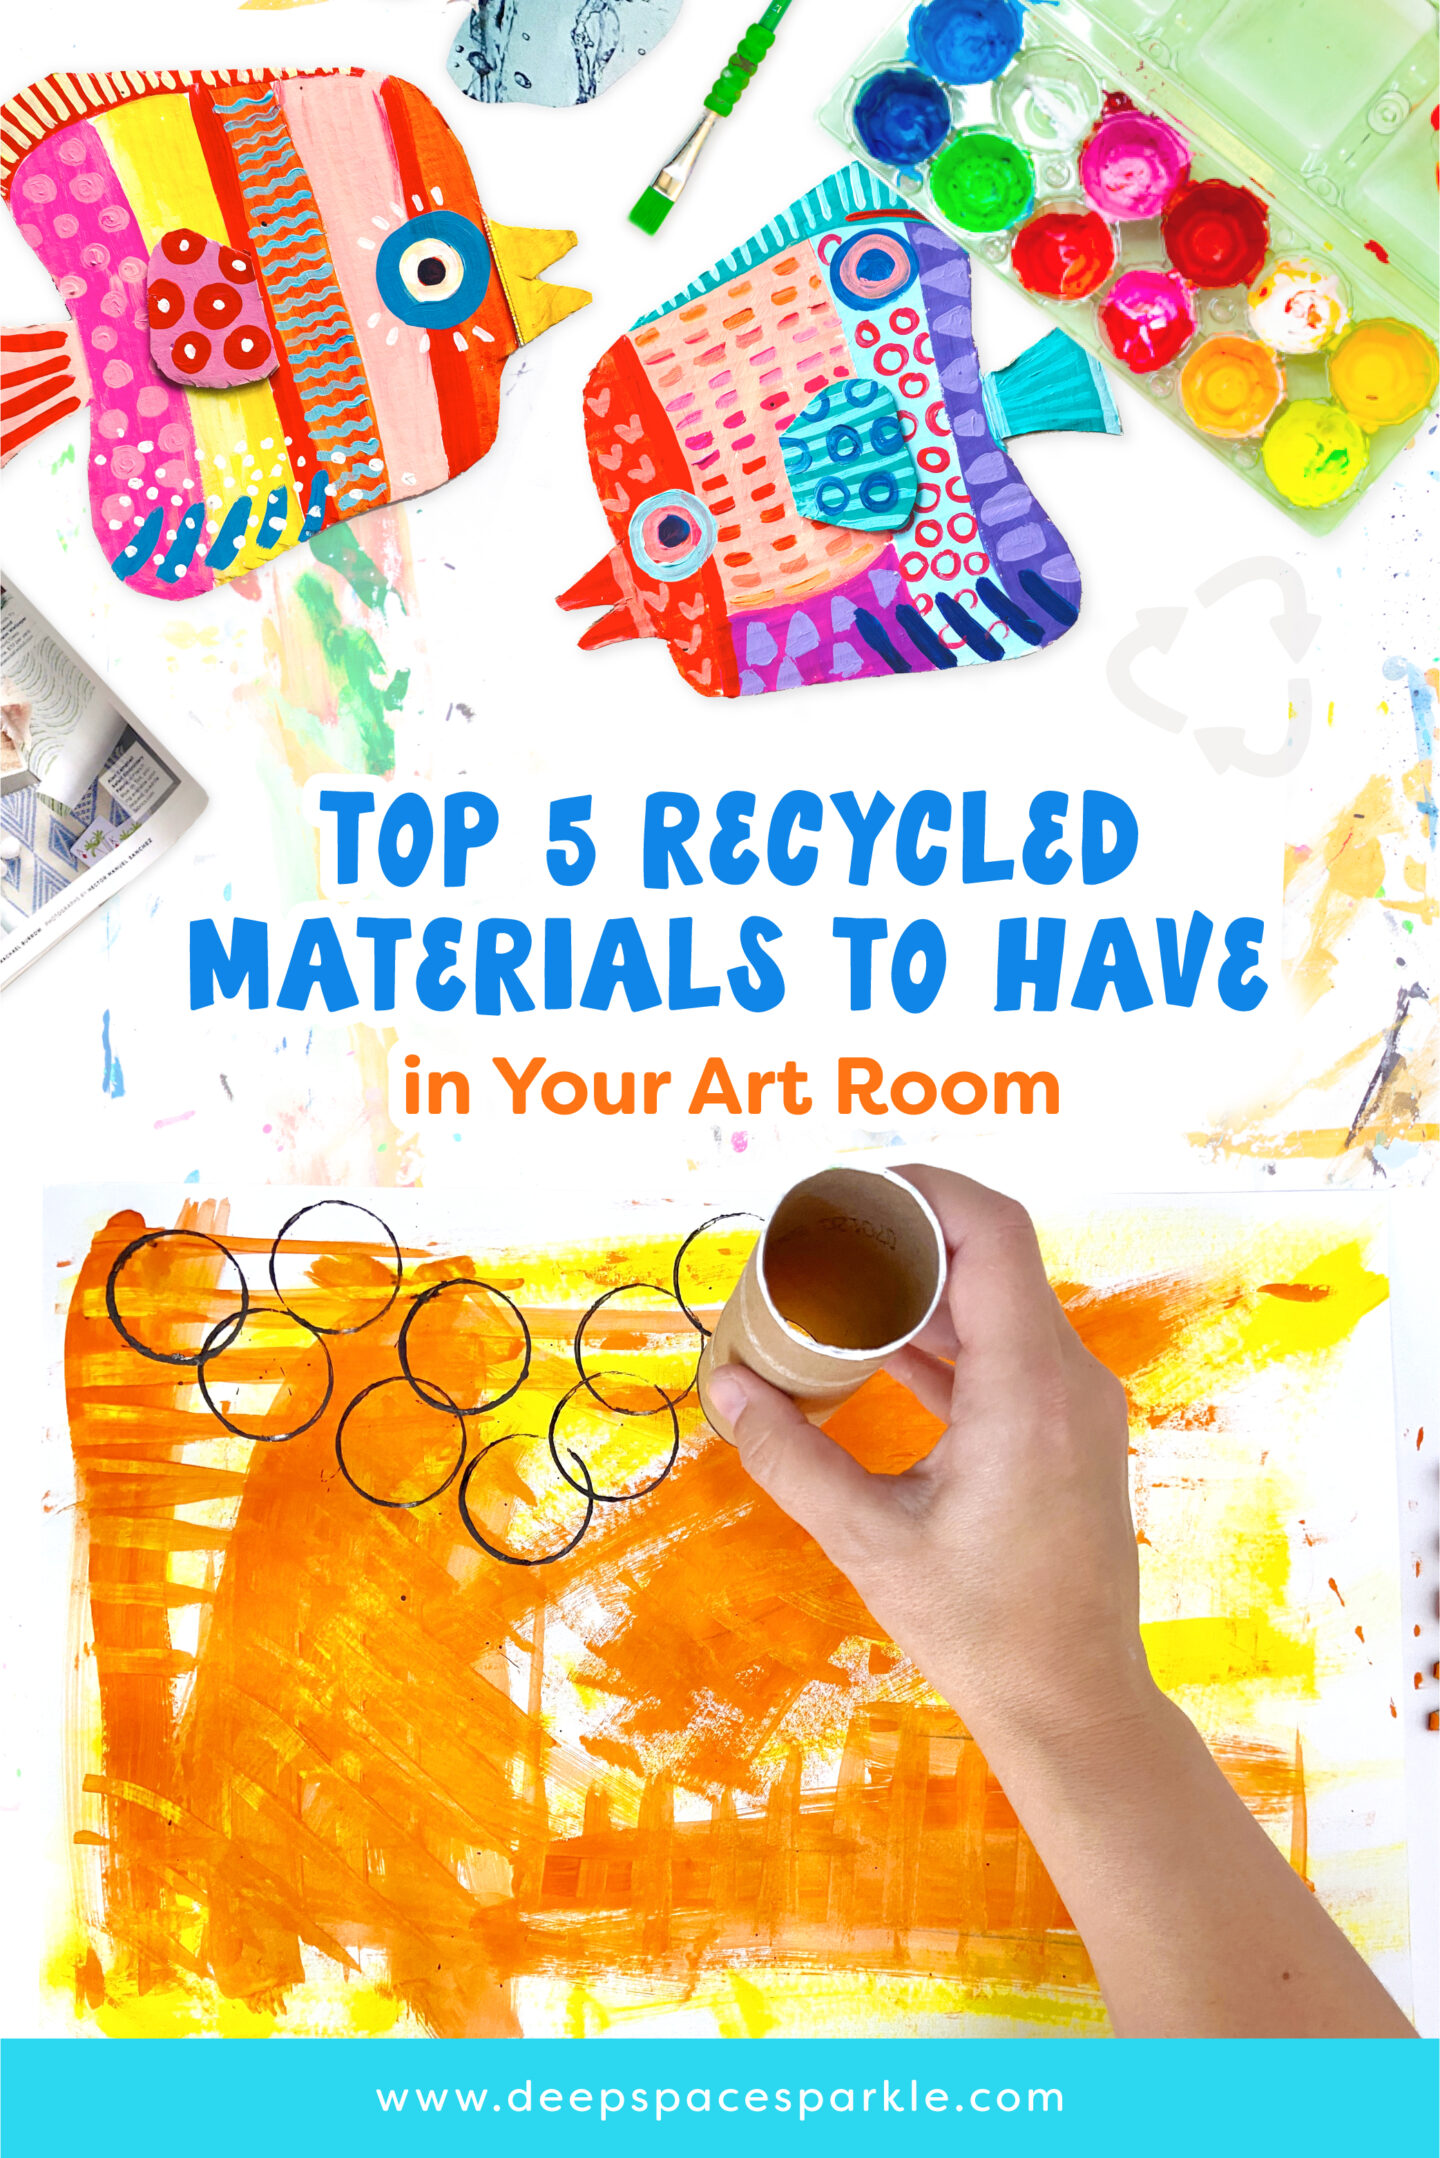 Top 5 Recycled Materials to have in your art room 